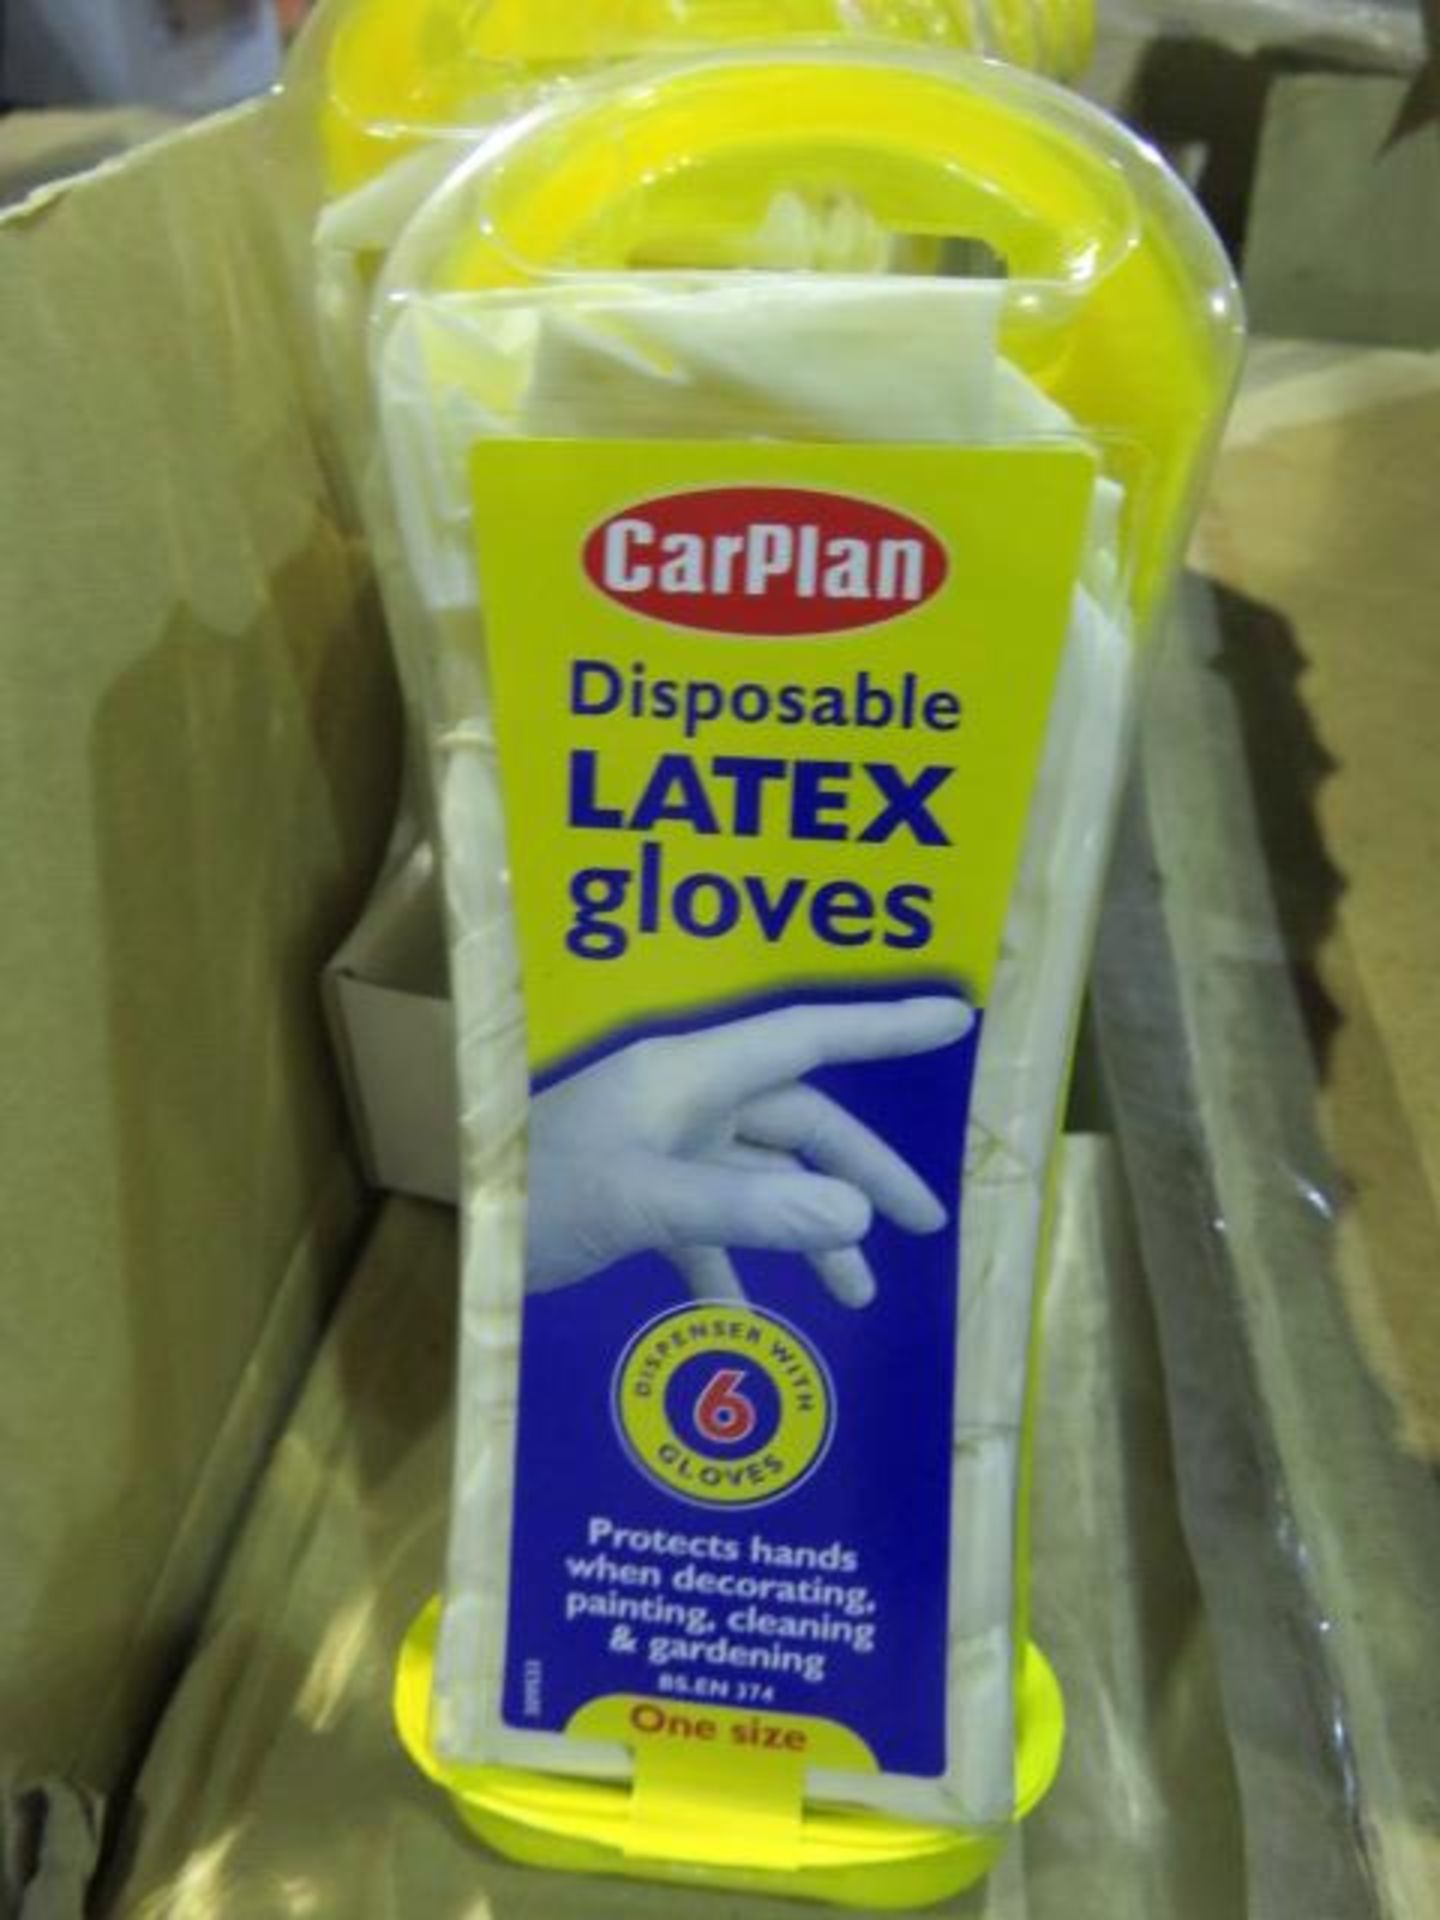 (314) PALLET TO CONTAIN 648 x CARPLAN 6 PAIRS OF DISPOSABLE LATEX GLOVES. RRP £2.99 PER PACK. ... - Image 2 of 3